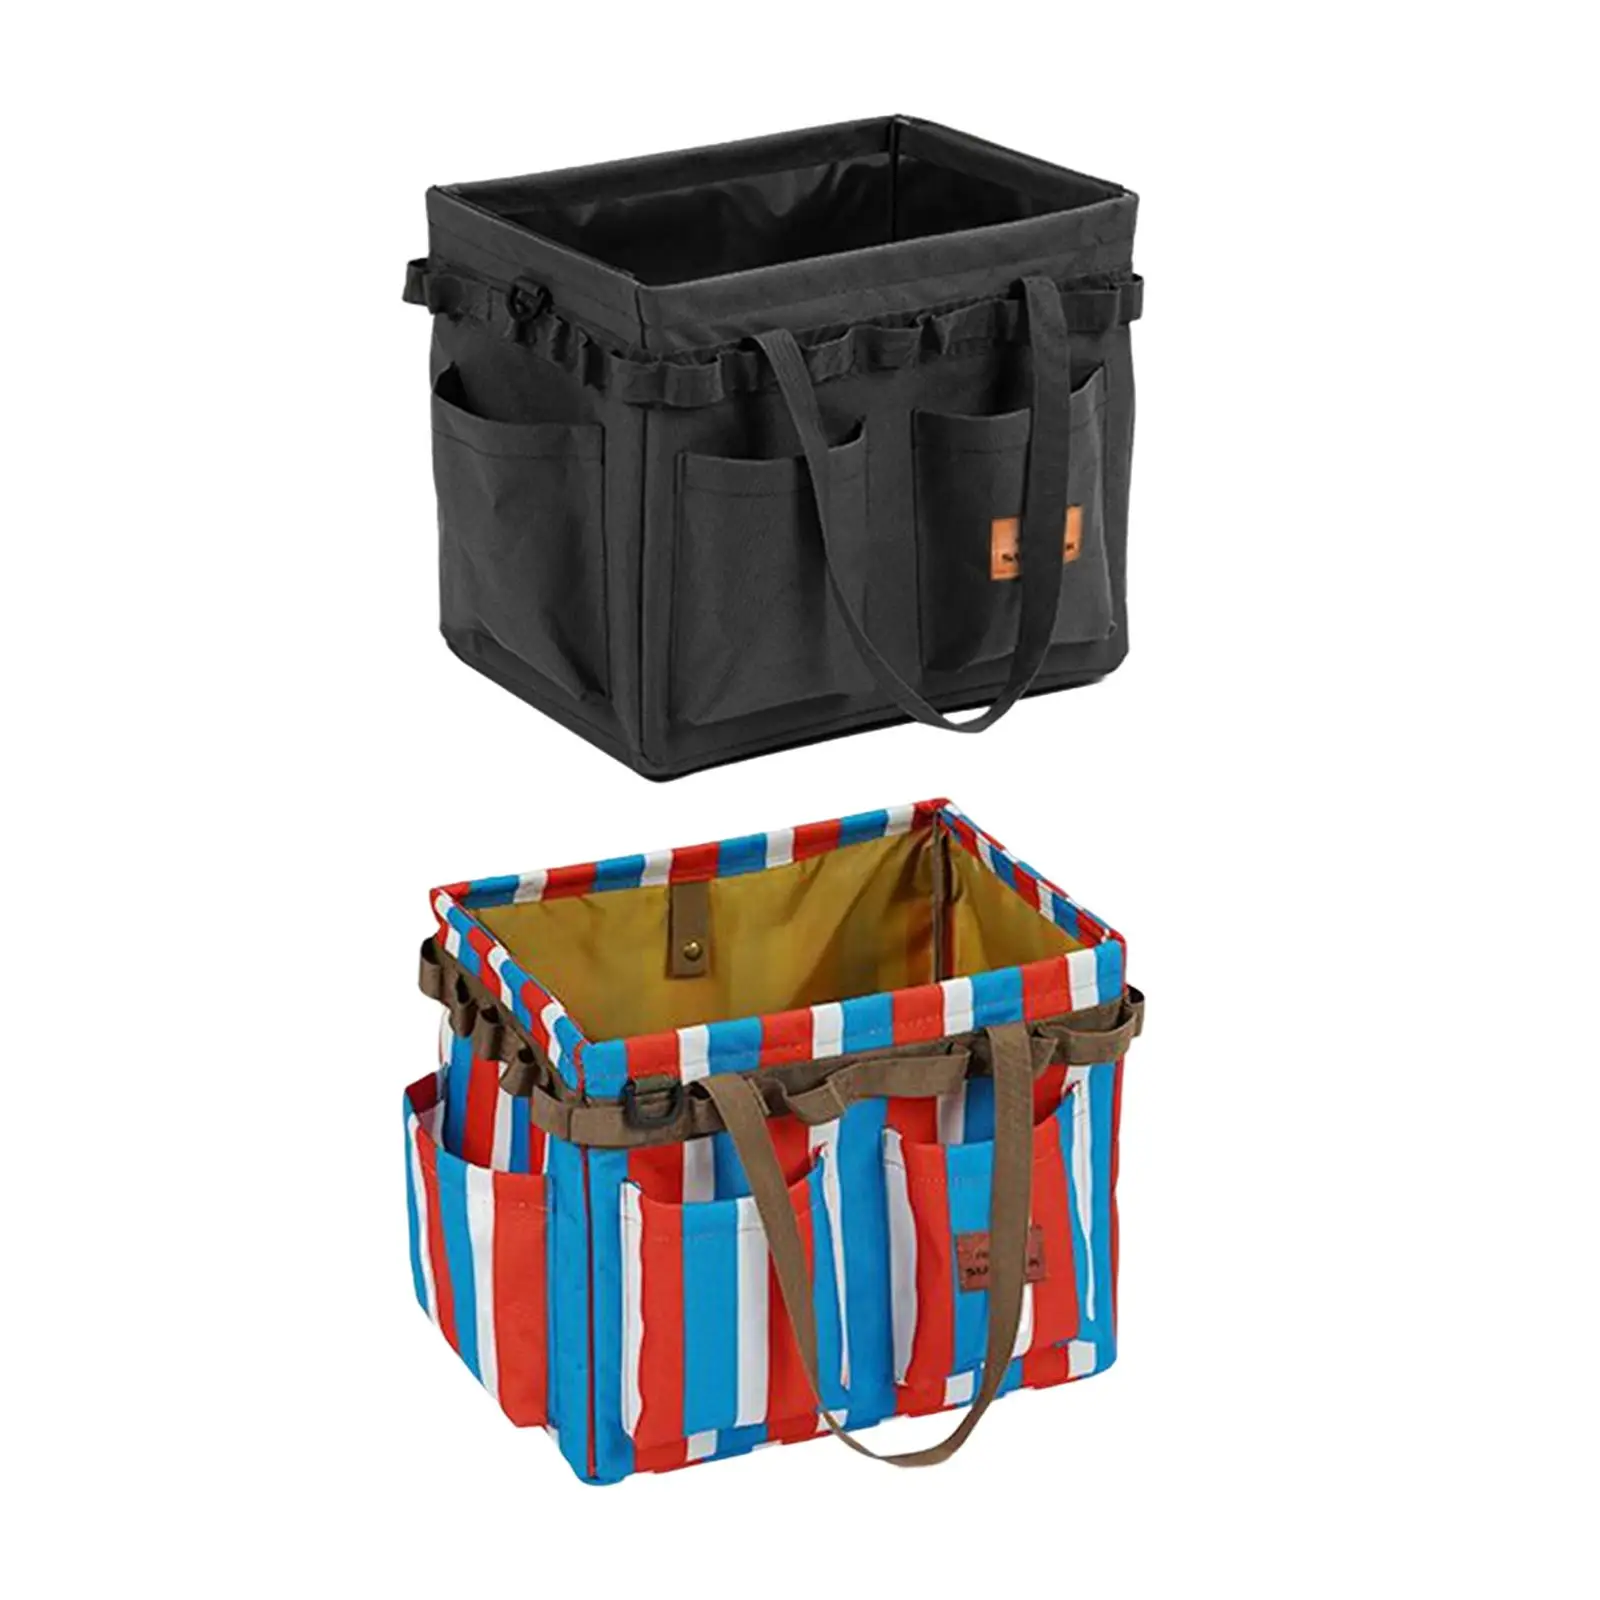 Camping Storage Bag Tool Organizer Barbecue with Carry Handles Utility Tote